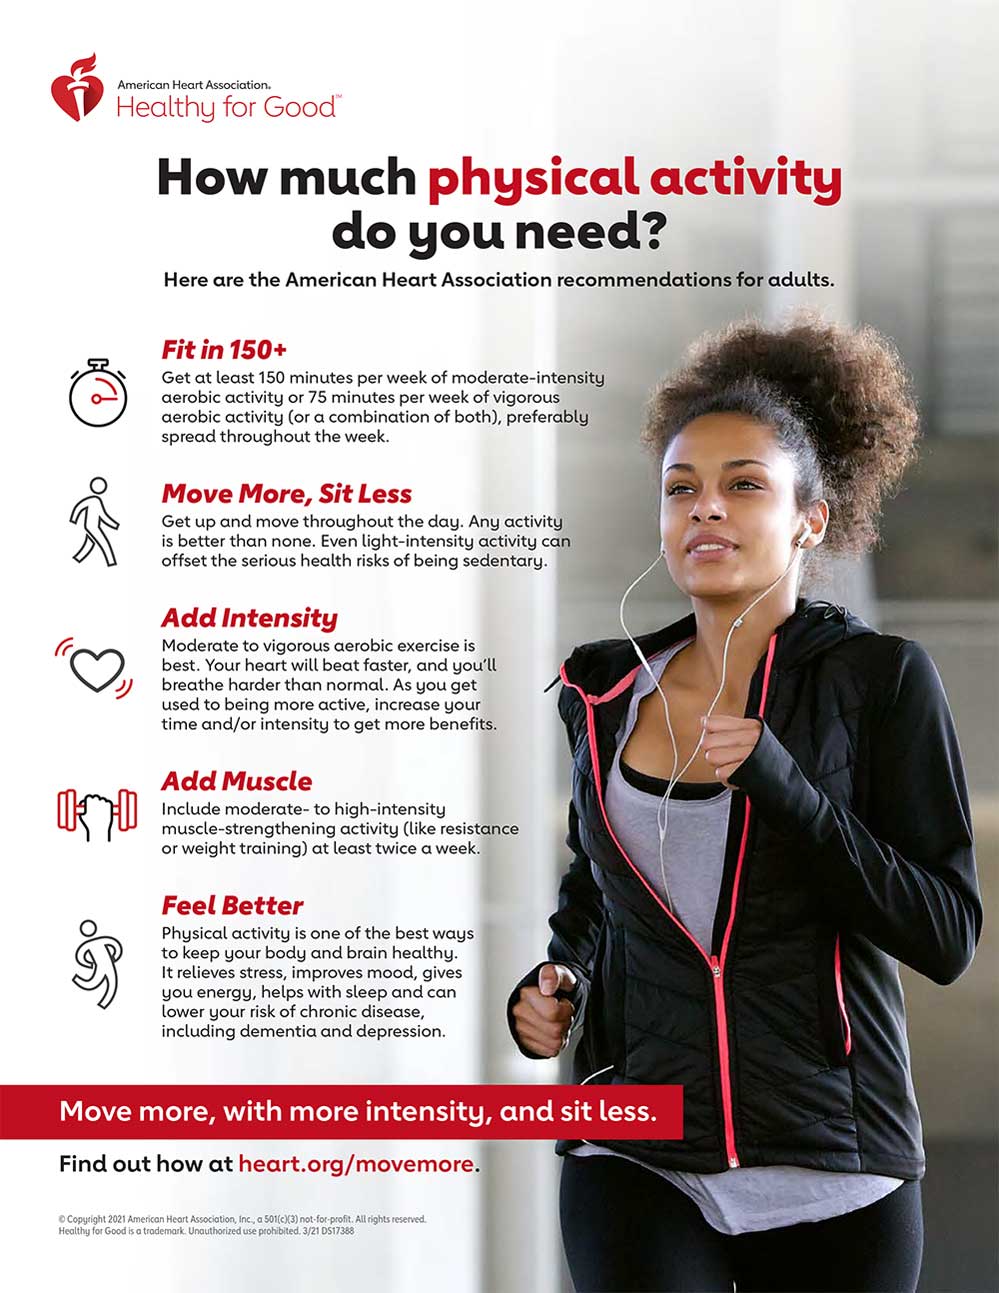 Move More, Feel Good: a new physical activity campaign from